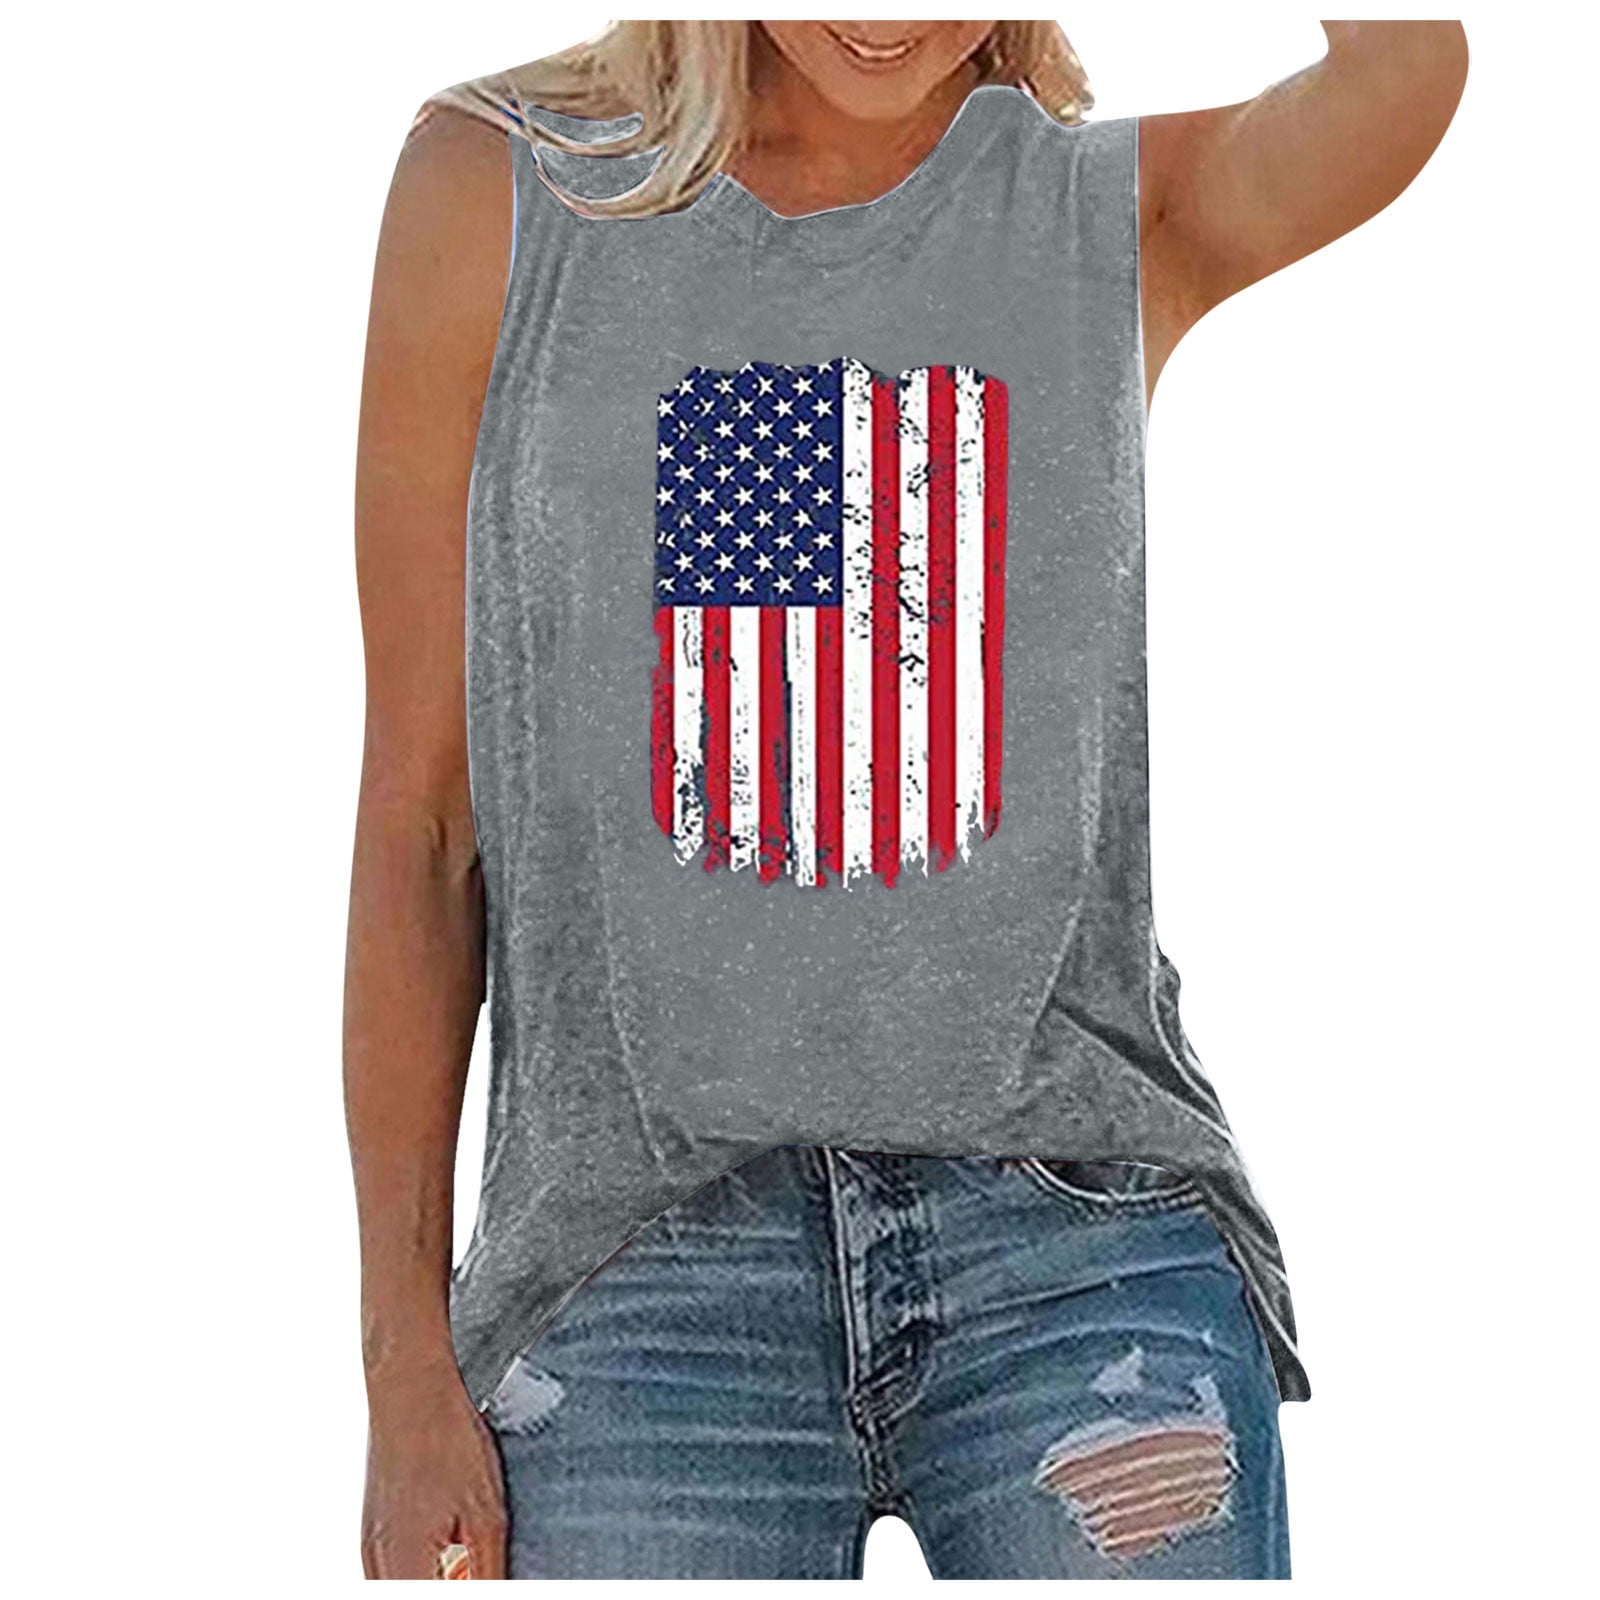 Laibory Womens Independence Day Print Casual Summer Sleeveless O-Neck T-Shirts Fashion Gym Fitness Vest Tank Tops Blouse 